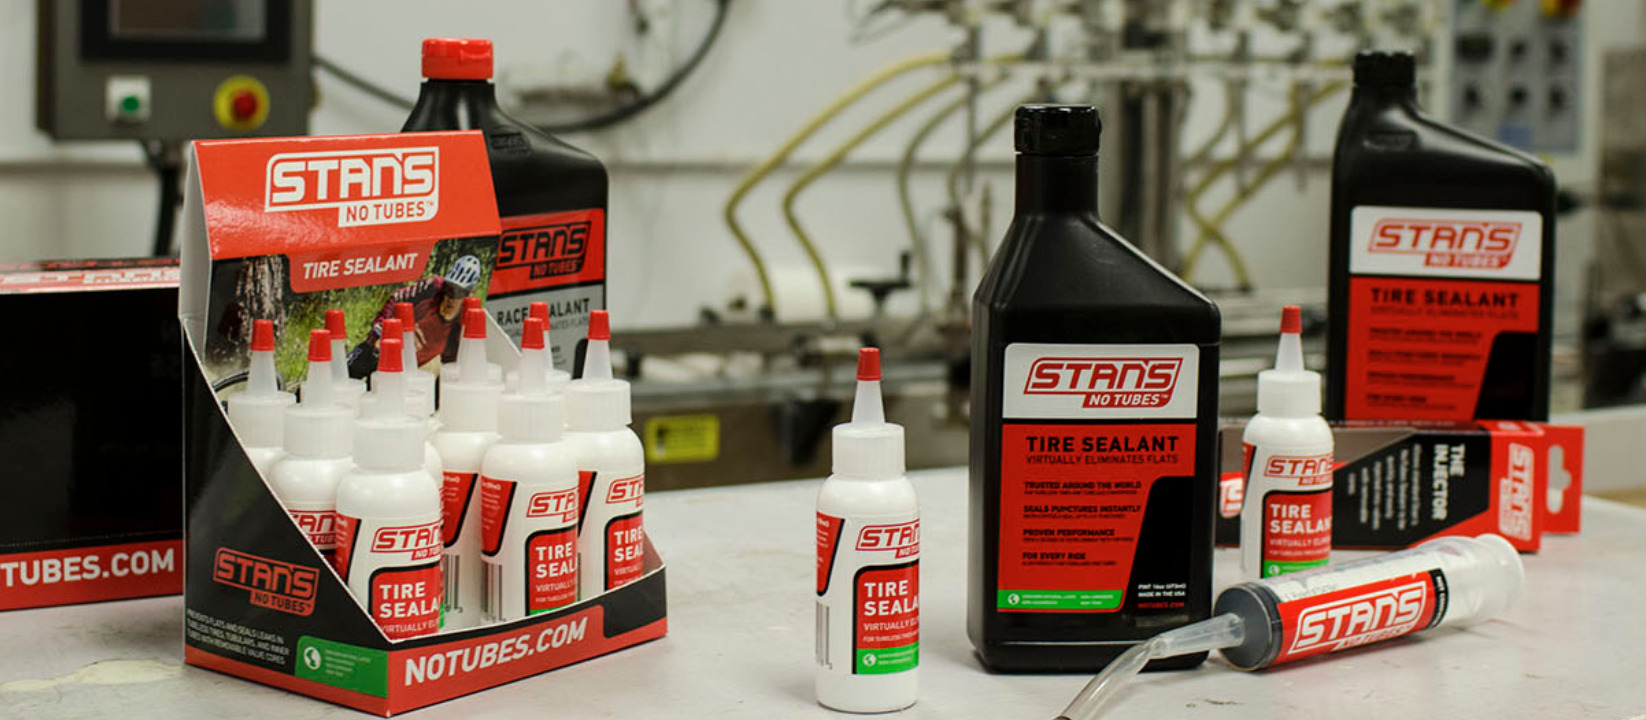 Sealant-based tubeless systems are now ubiquitous on mountain bikes, but how did we get here? On our latest episode of Bikes & Big Ideas we sat down with Mike Bush, the President of Stan’s, to talk about the early days of tubeless development; why we still use rim tape and sealant; rim profiles; tire inserts; sealant formulation and how it actually works; and a whole lot more. Check it out wherever you get your podcasts, or on our site.